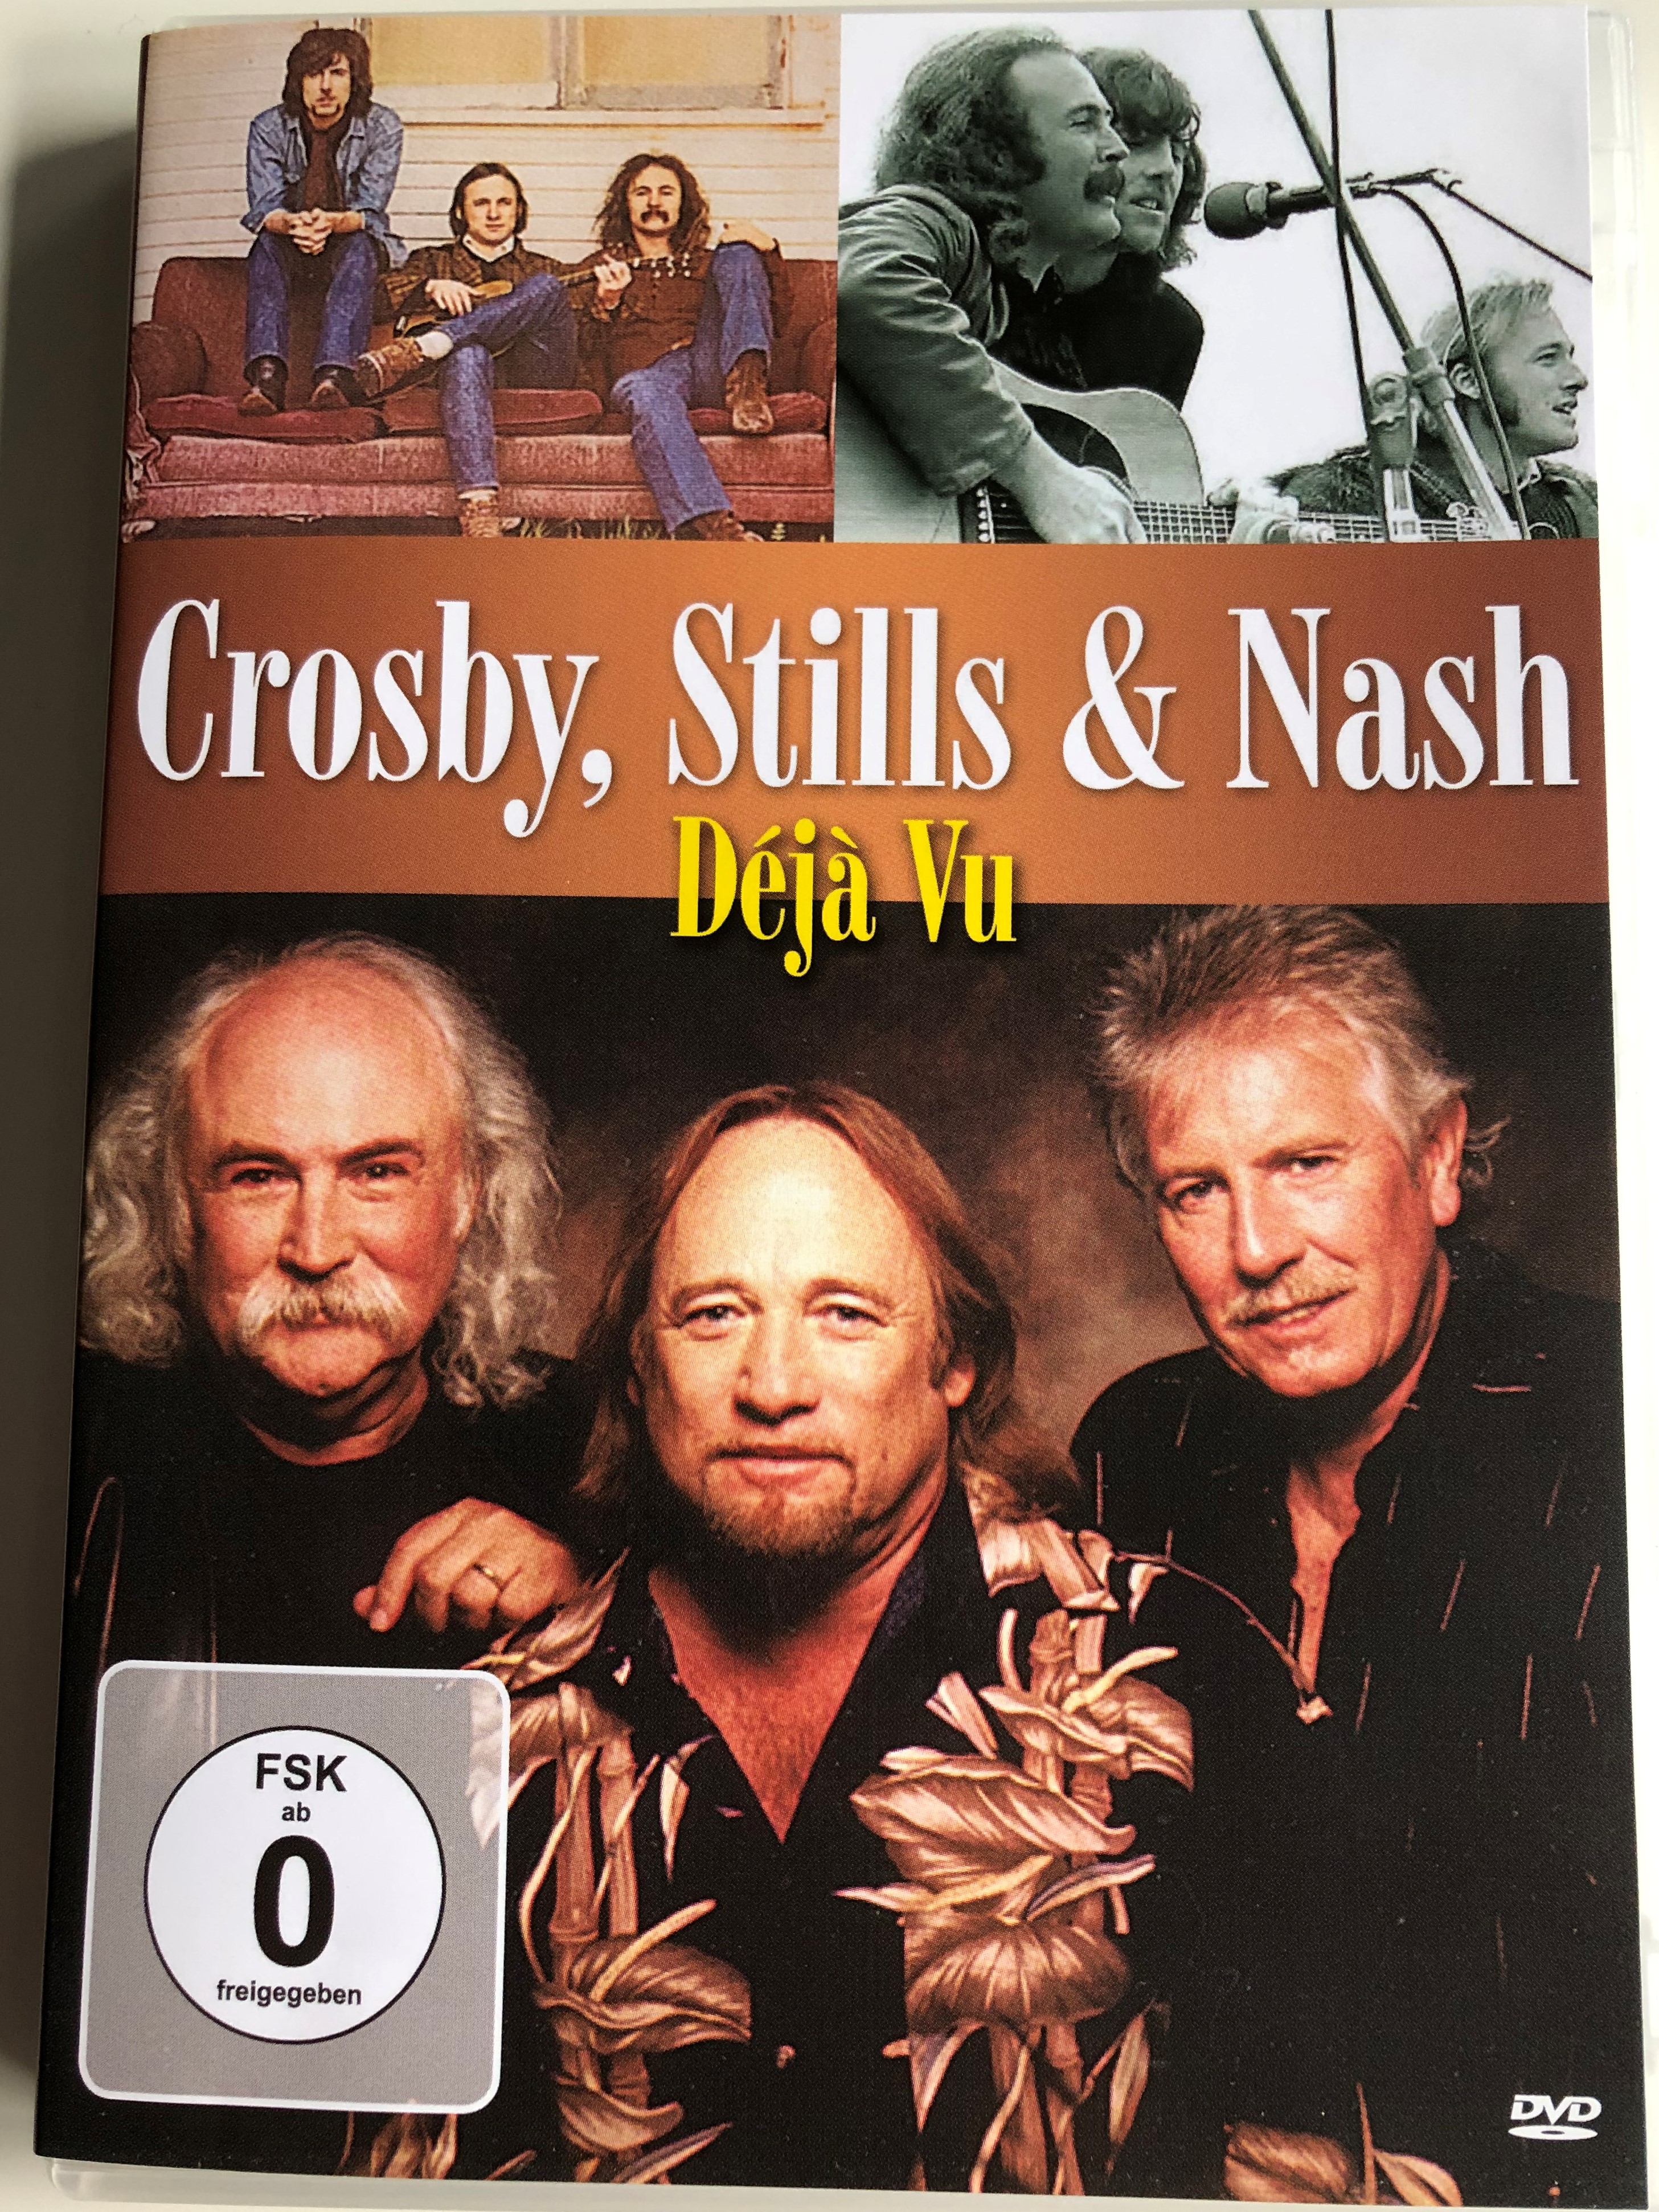 Crosby, Stills & Nash - Déjá Vu DVD / Taken At All, Chicago, Helplessly  Hoping, Wooden Ships, Our House - Bible in My Language